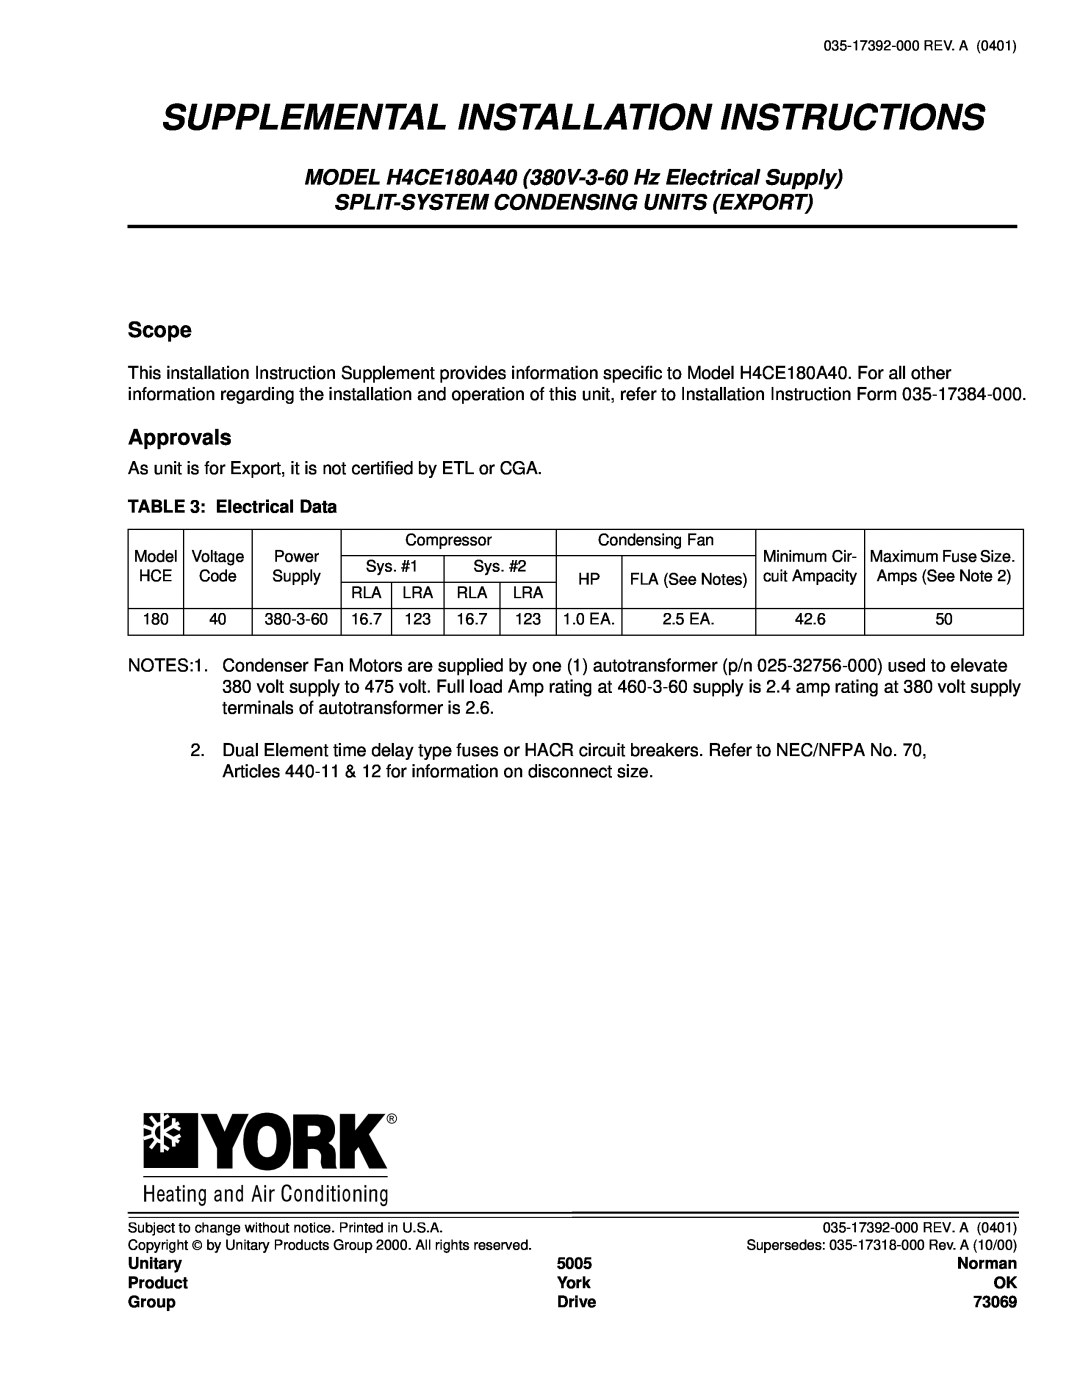 York H4CE180A40 installation instructions Supplemental Installation Instructions, Split-System Condensing Units Export 